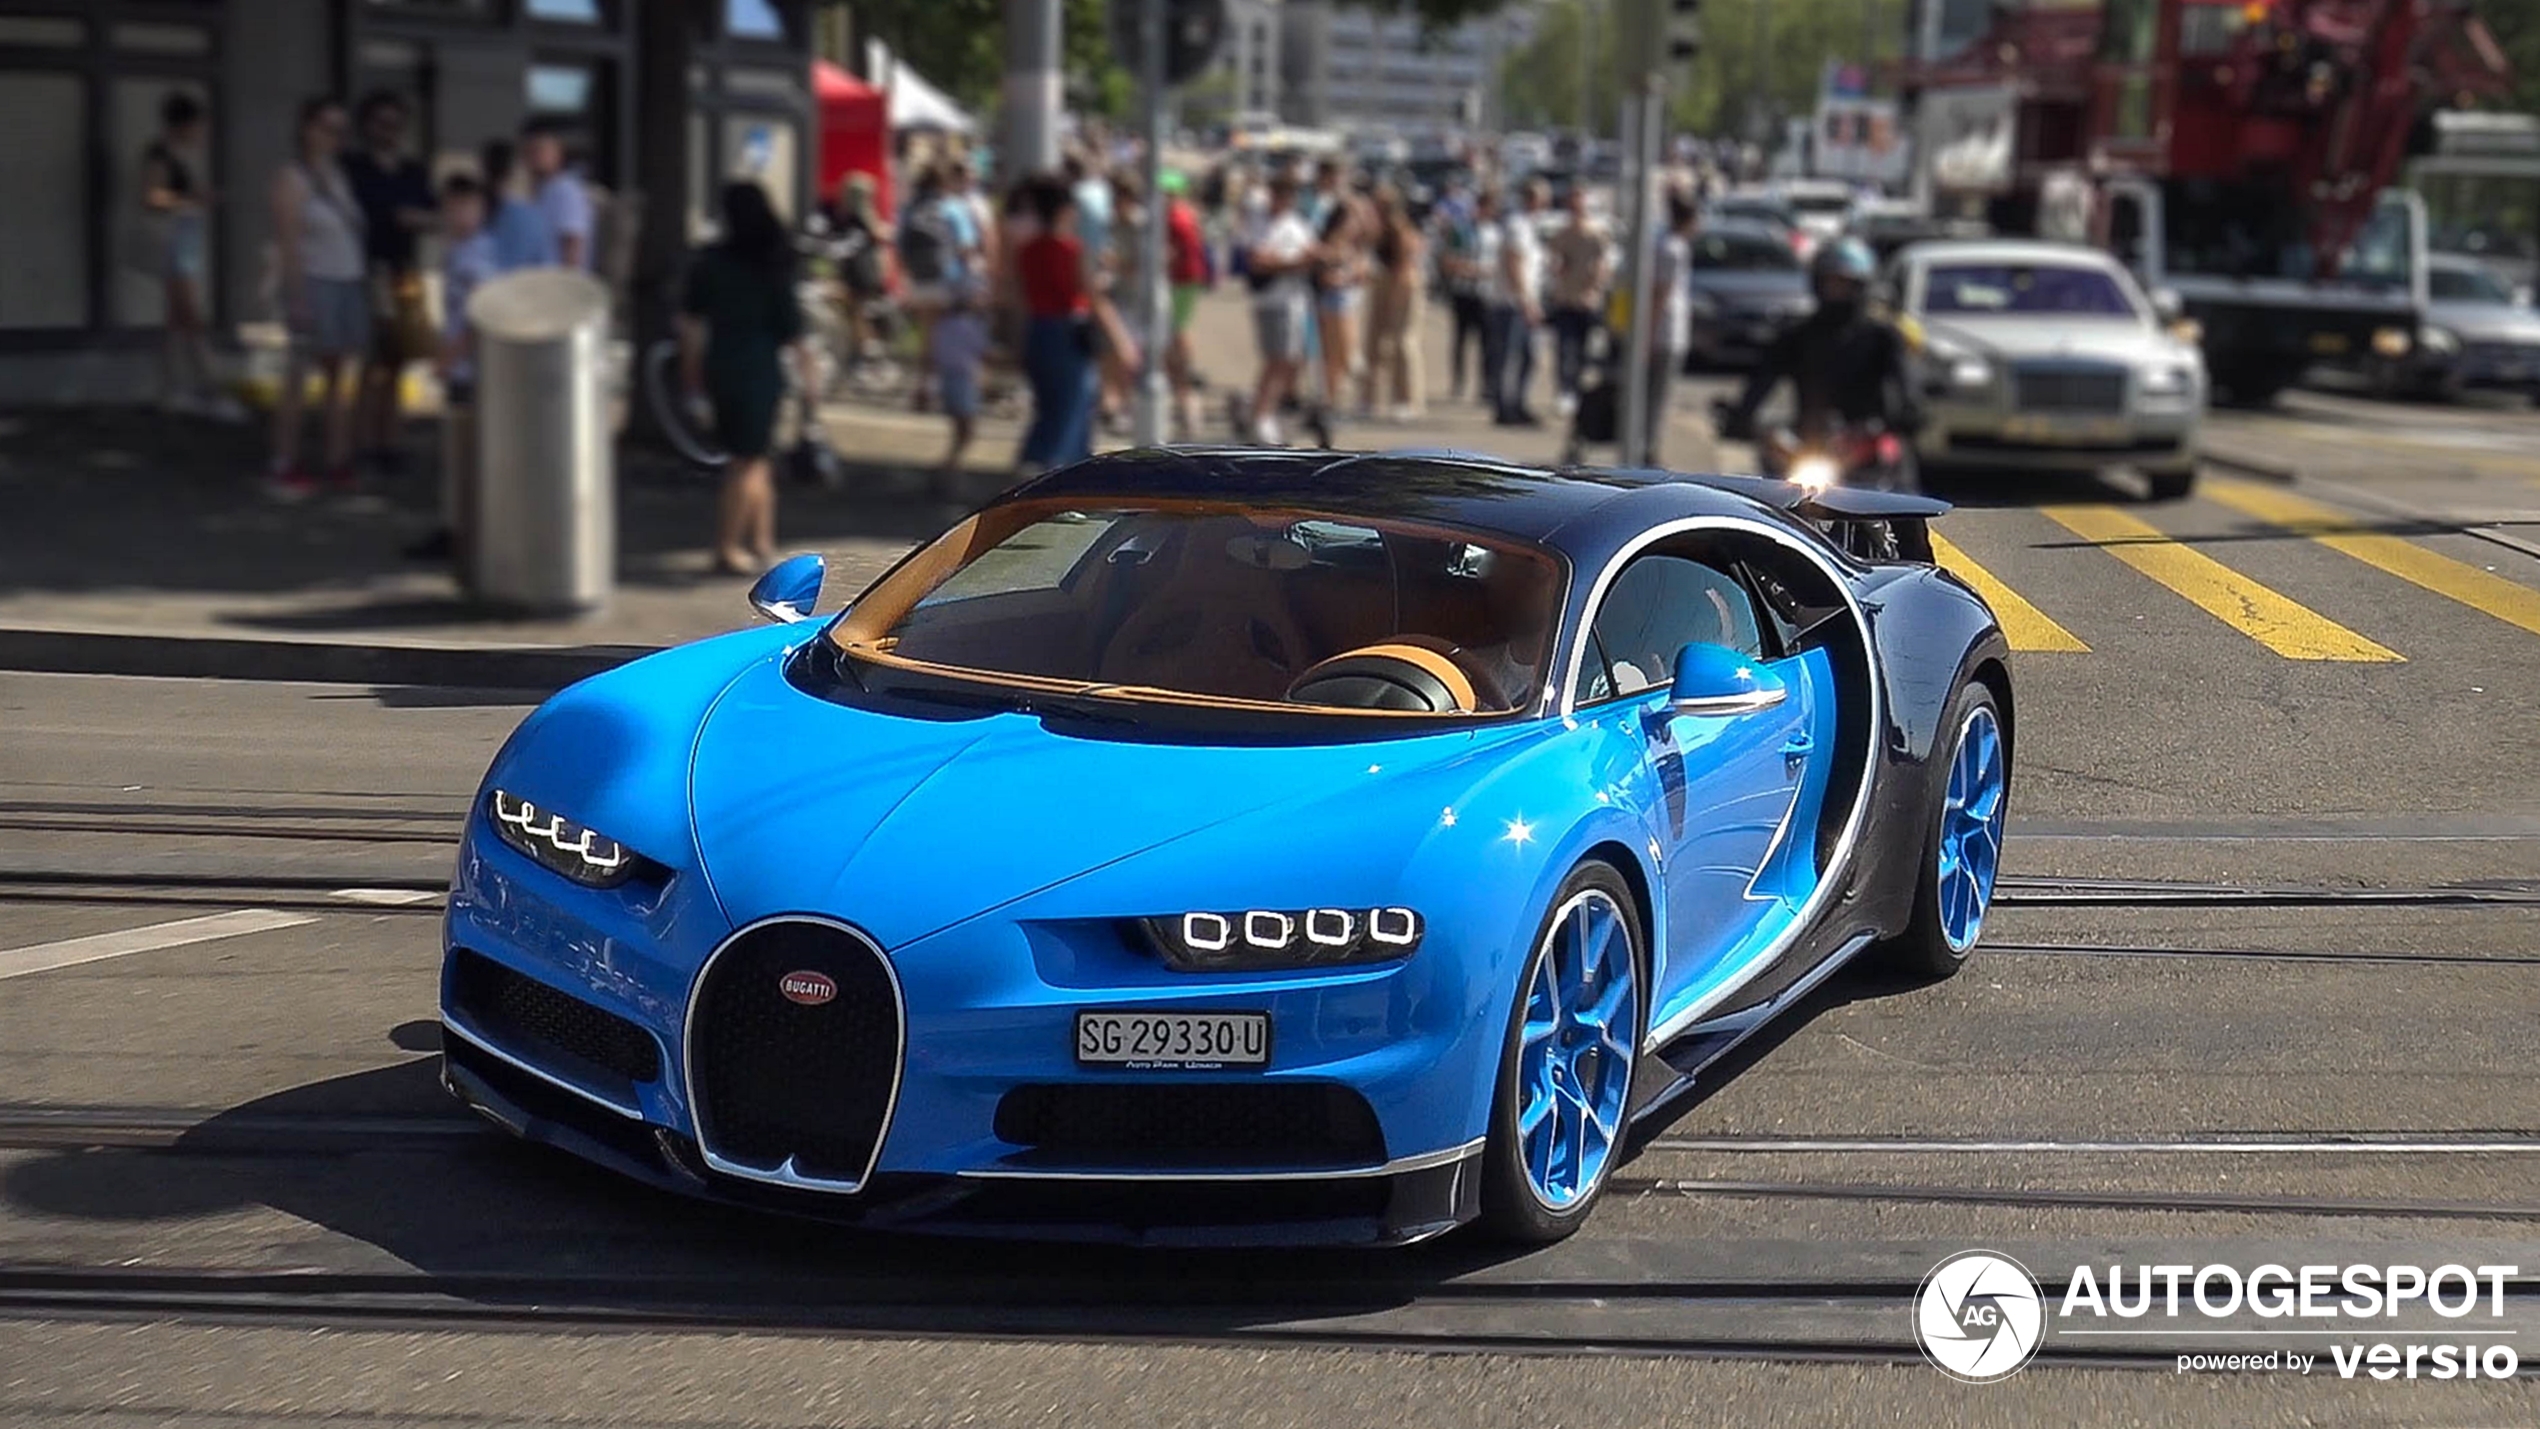 Again a new Chiron shows up in Zürich